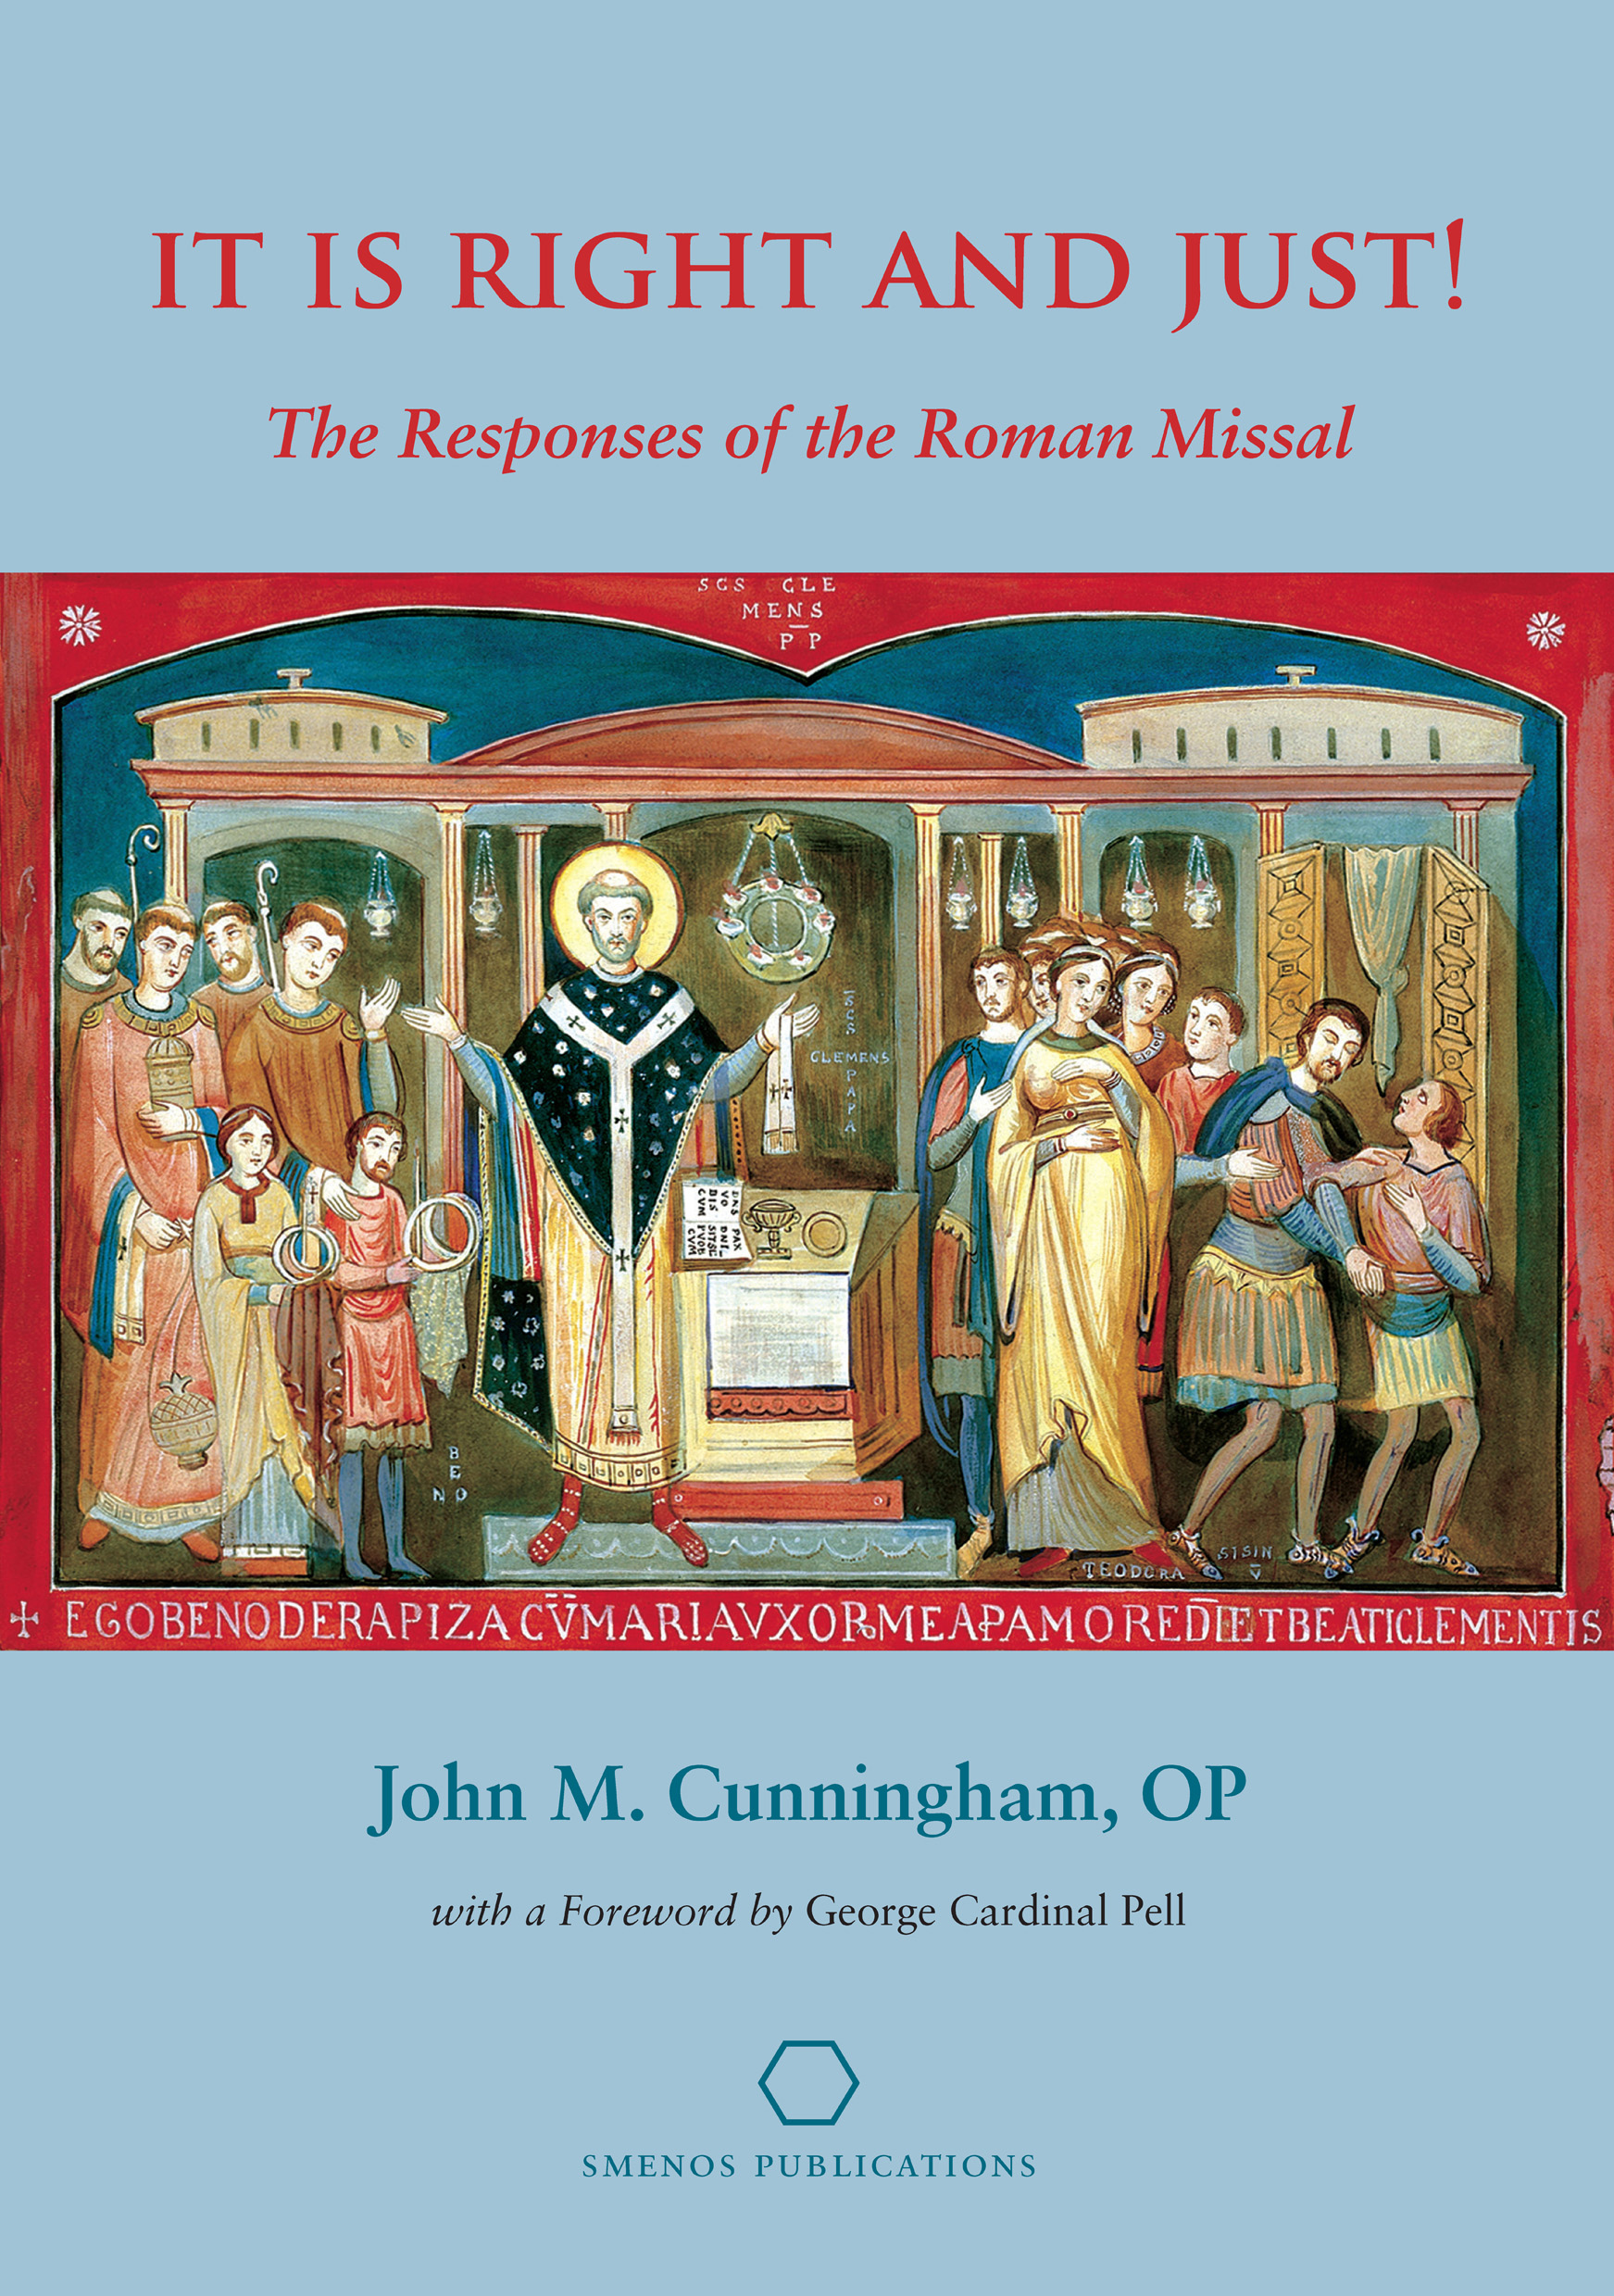 It is Right and Just: The Responses of the Roman Missal